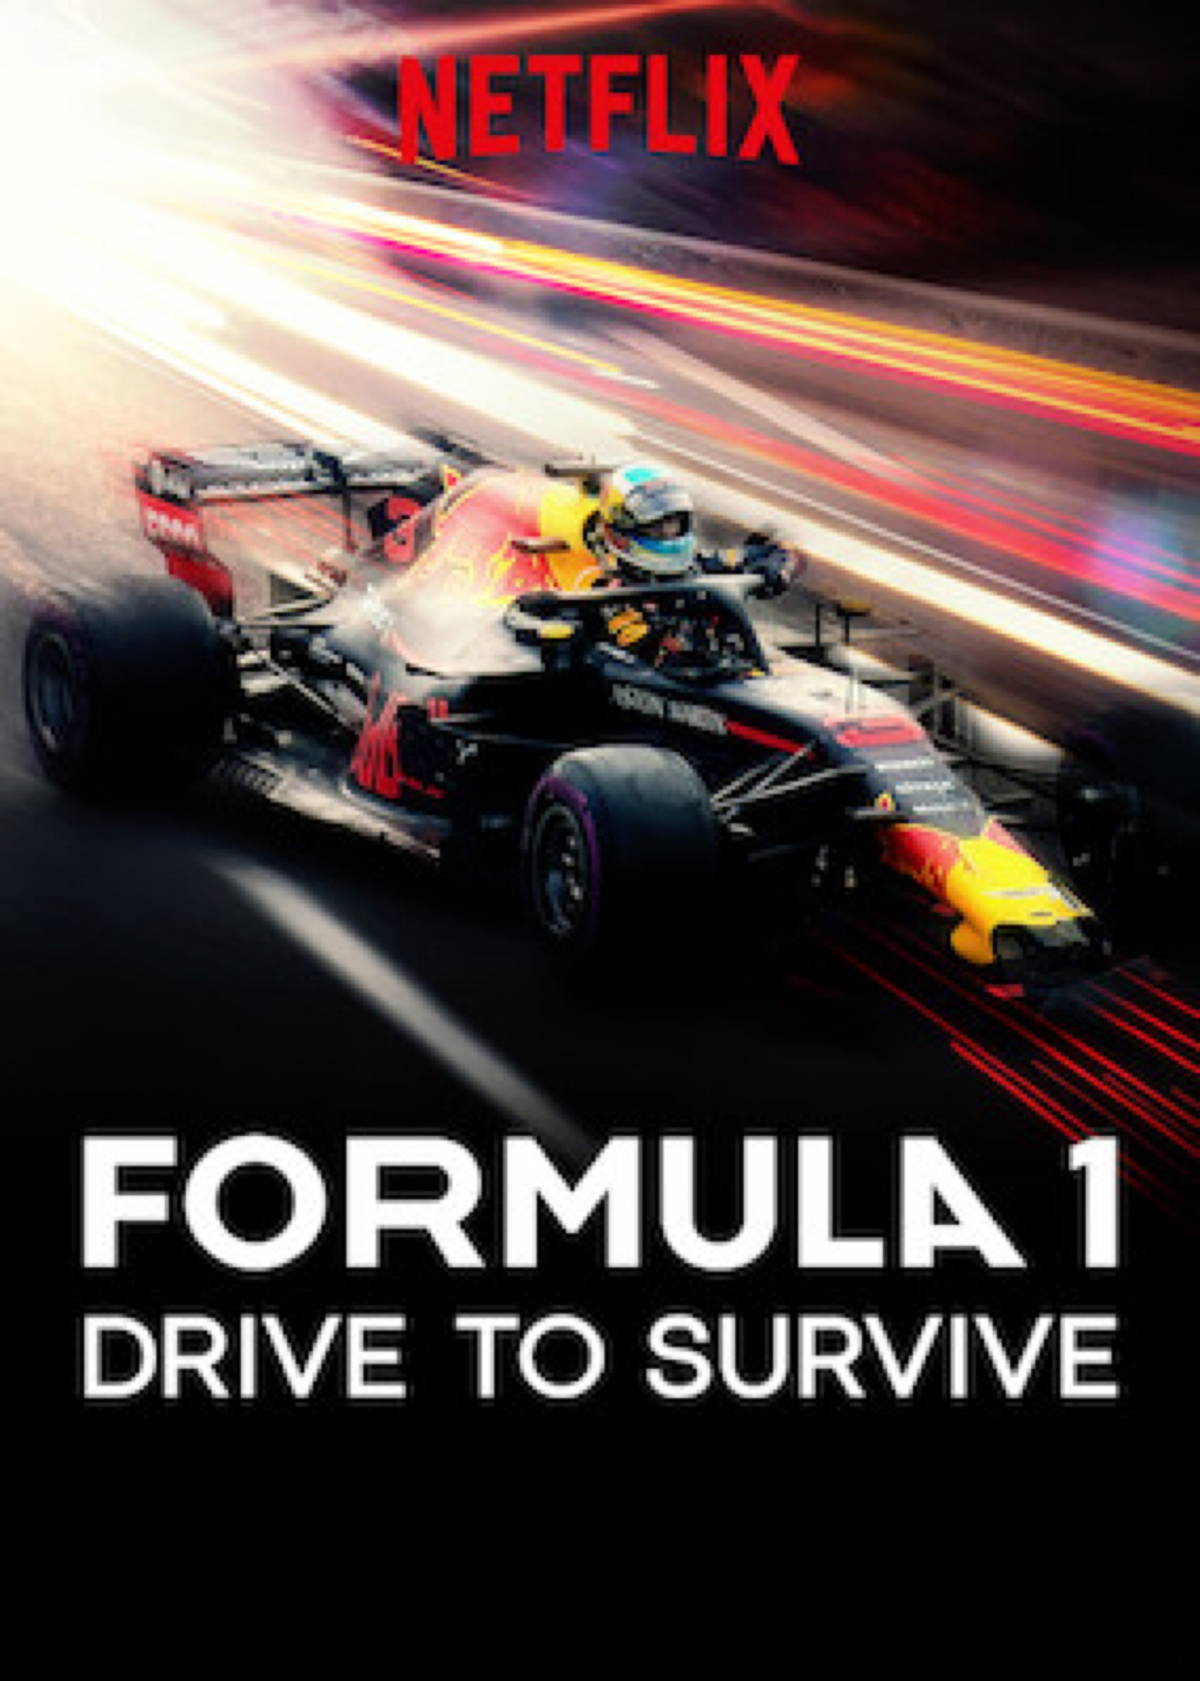 Formula 1: Drive to Survive Season 1 Episode 1 ”All to Play For”